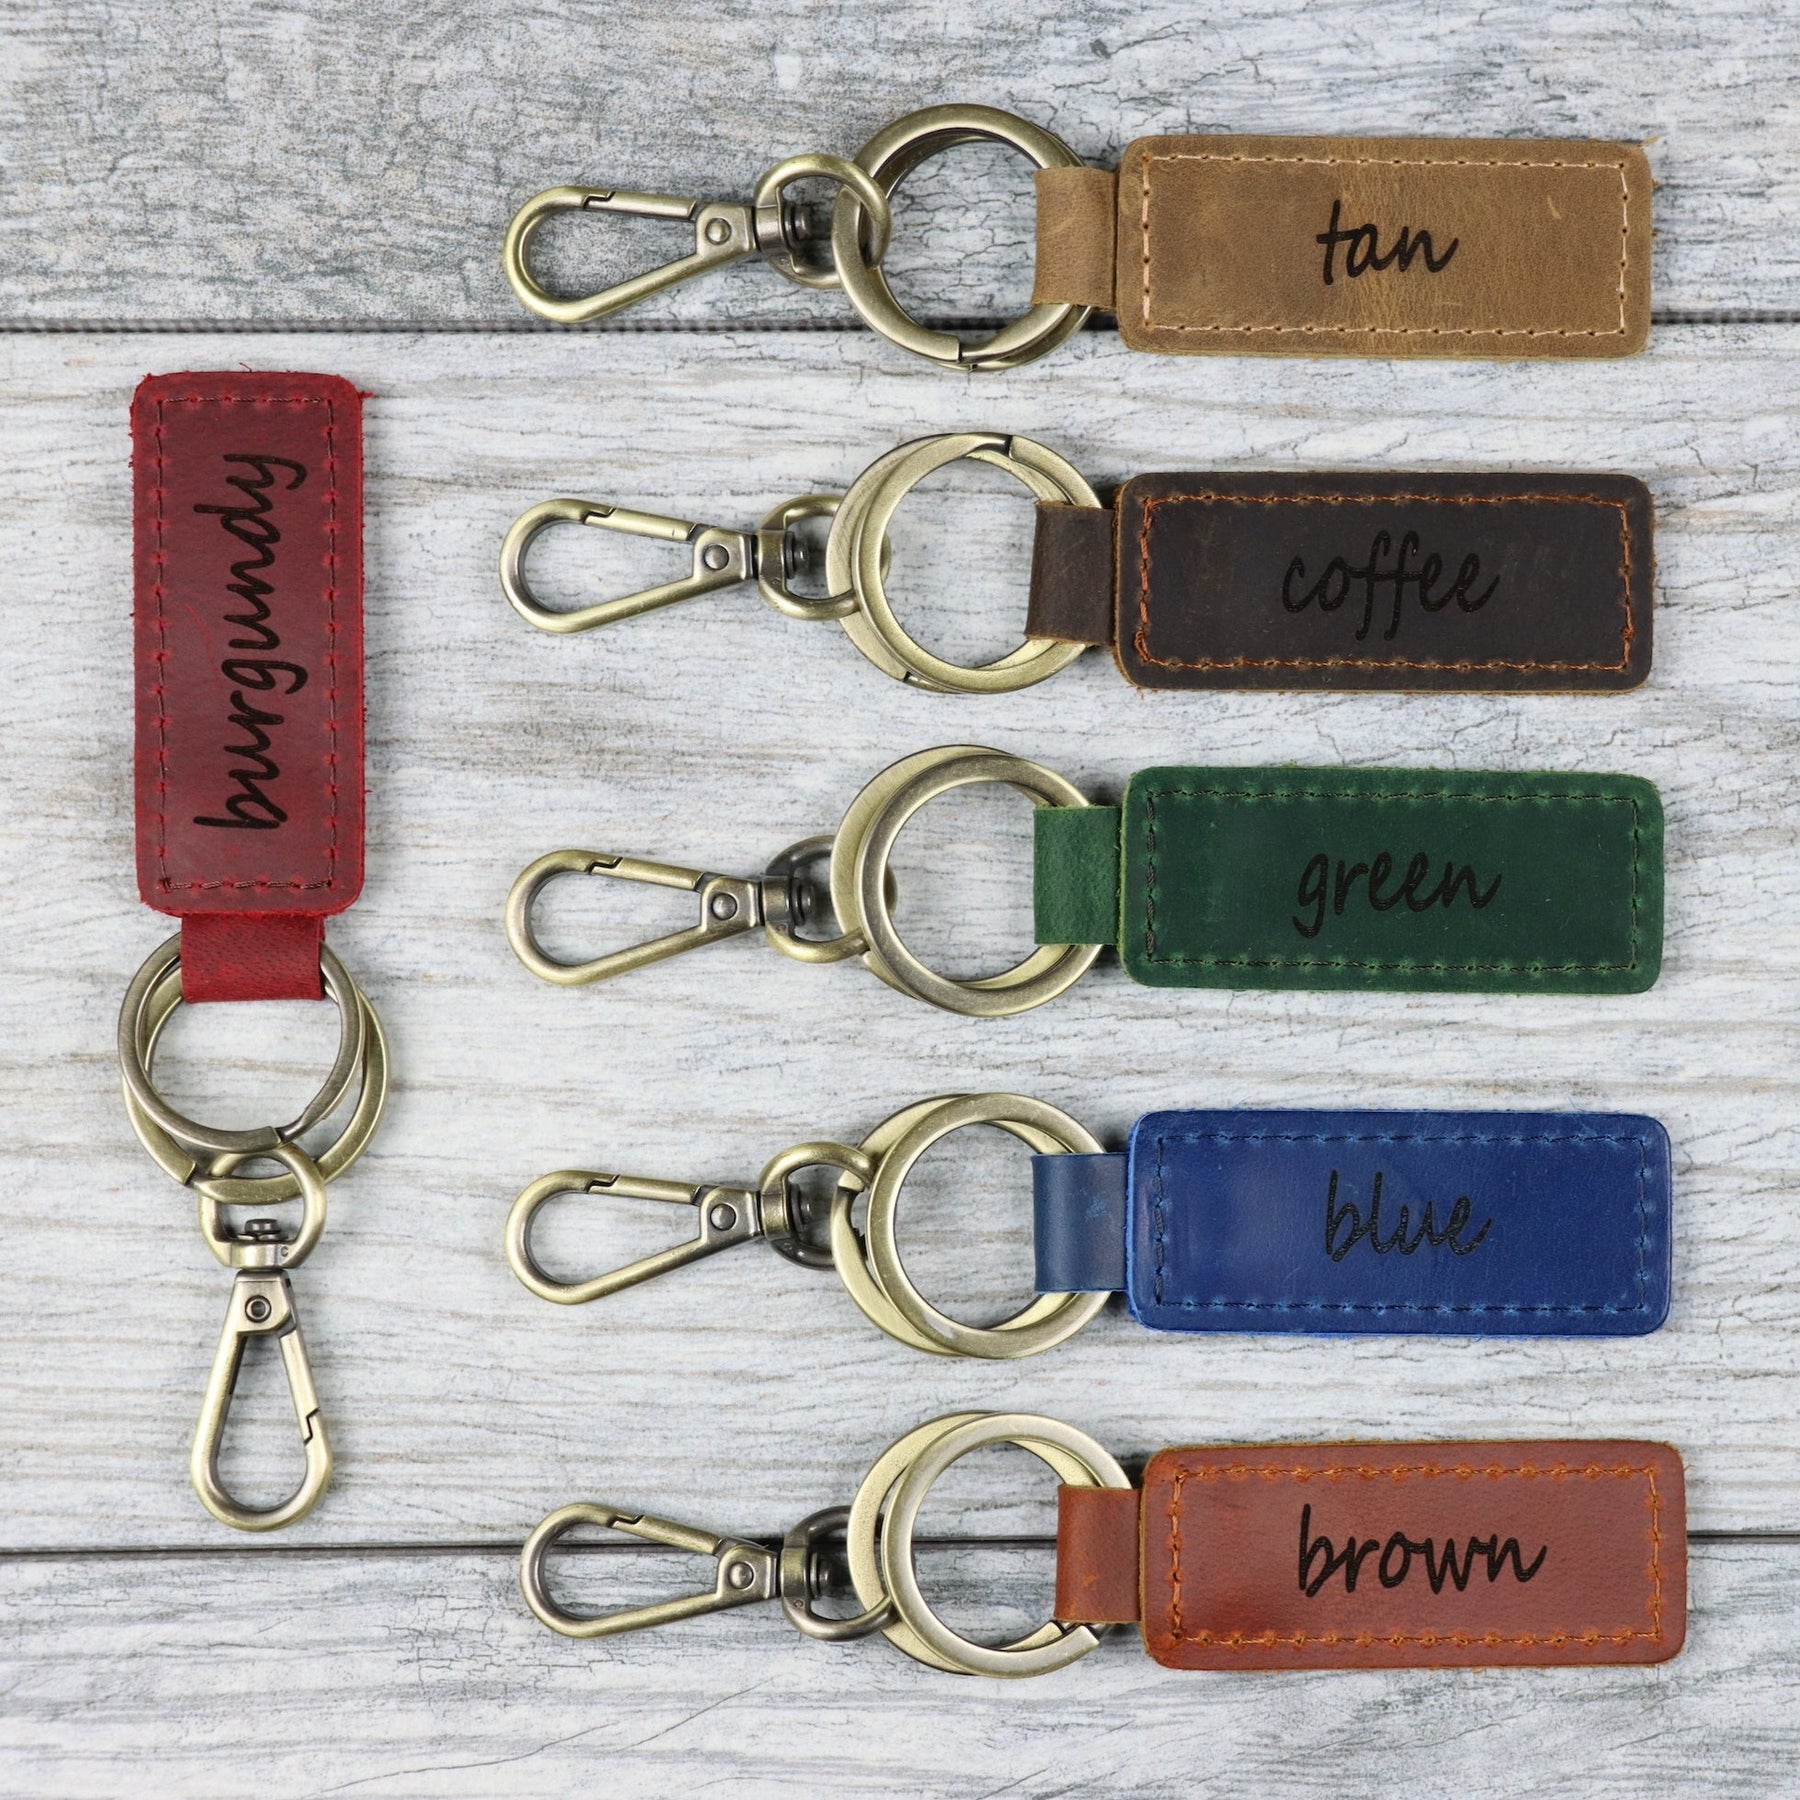 10 pack Blank Leather Keychains ready to be Personalized